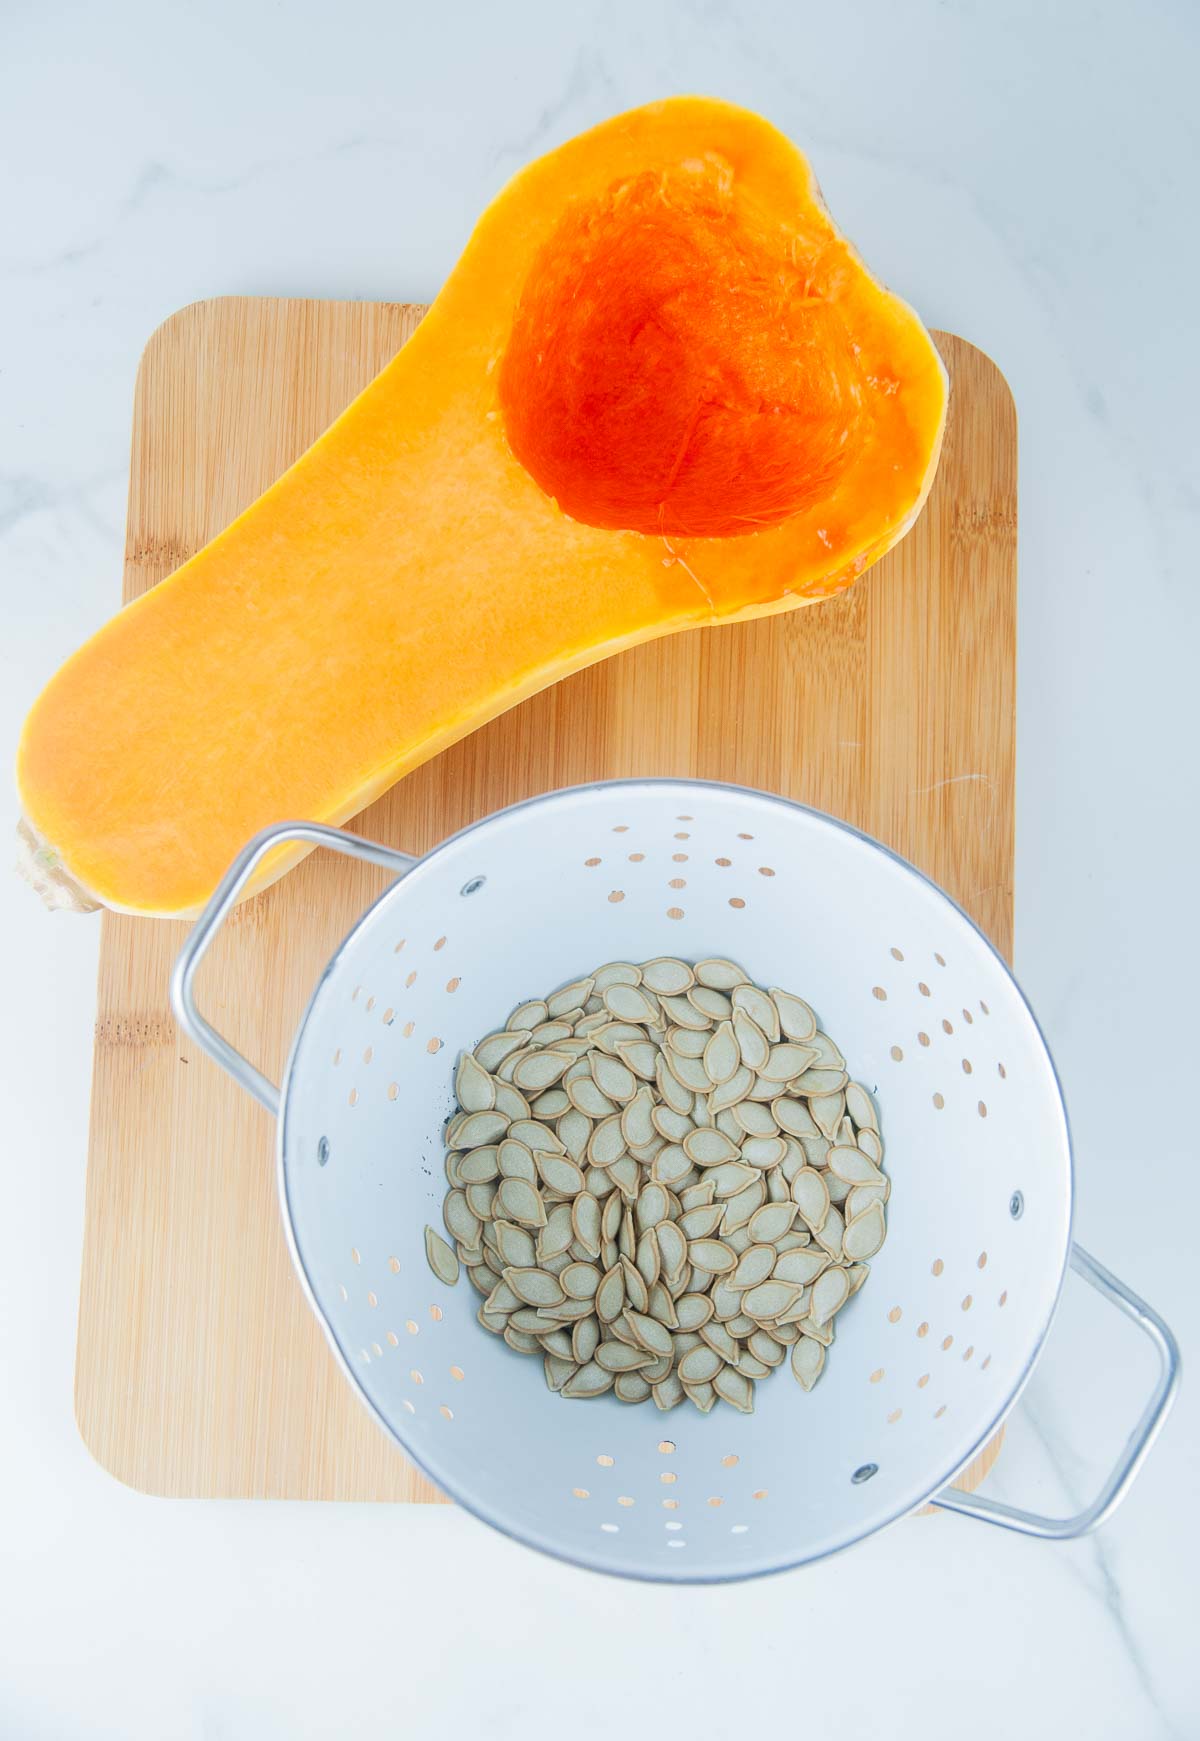 Rinse the butternut squash seeds until they are clean.